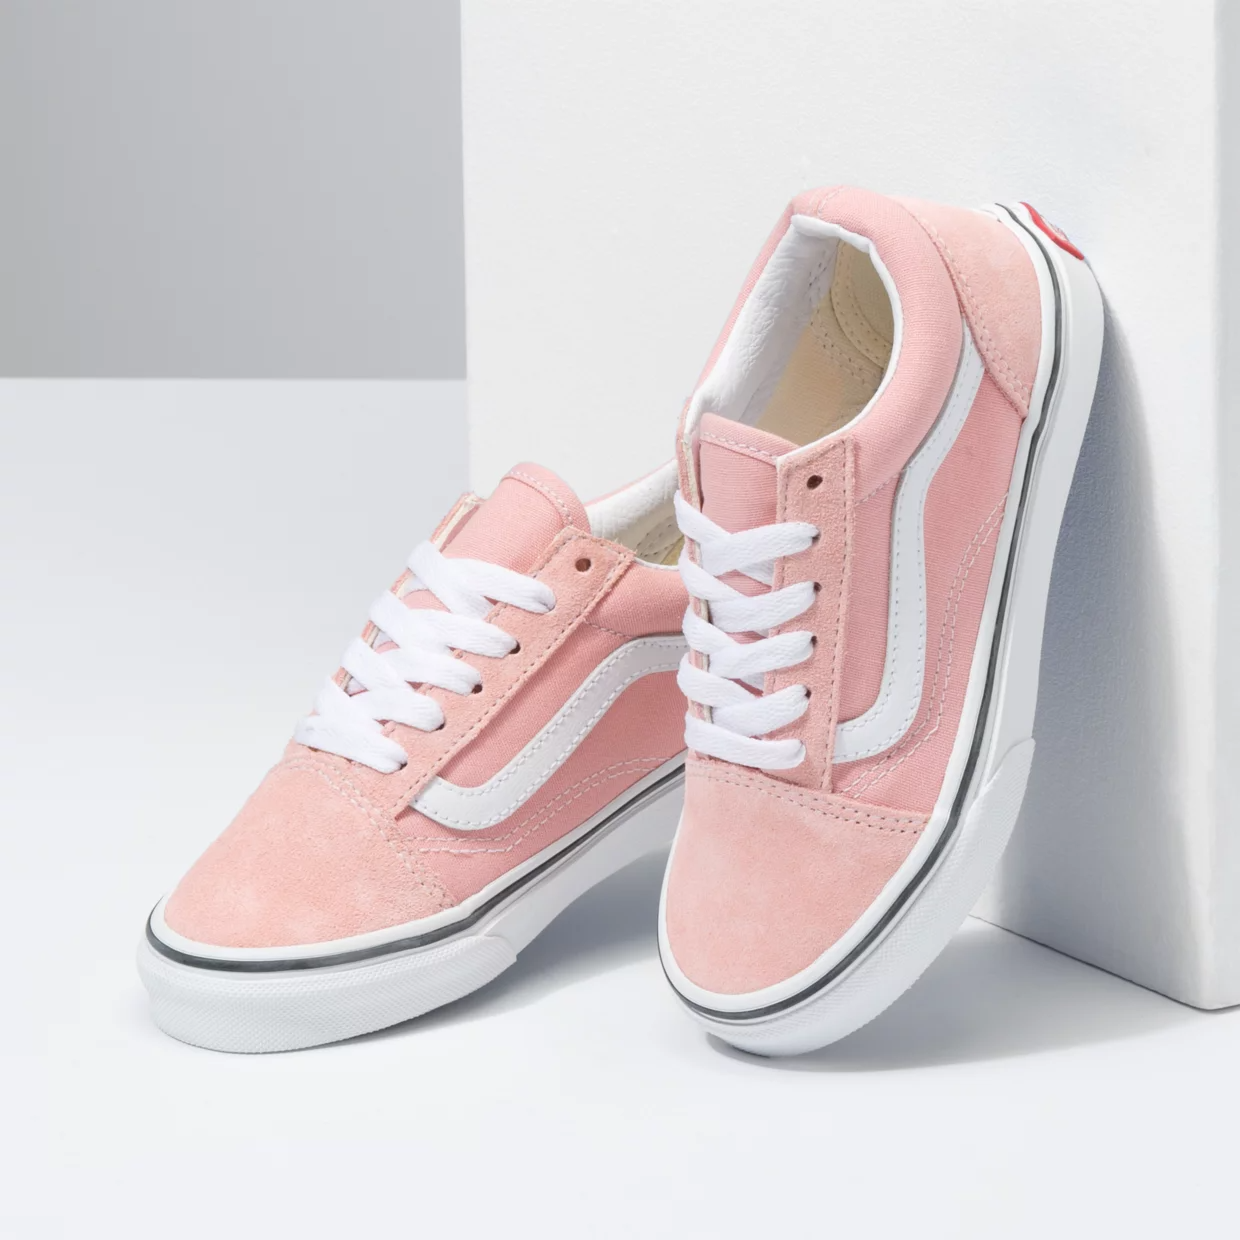 authority sin Publicity VANS OLD SKOOL SHOES POWDER PINK/TRUE WHITE